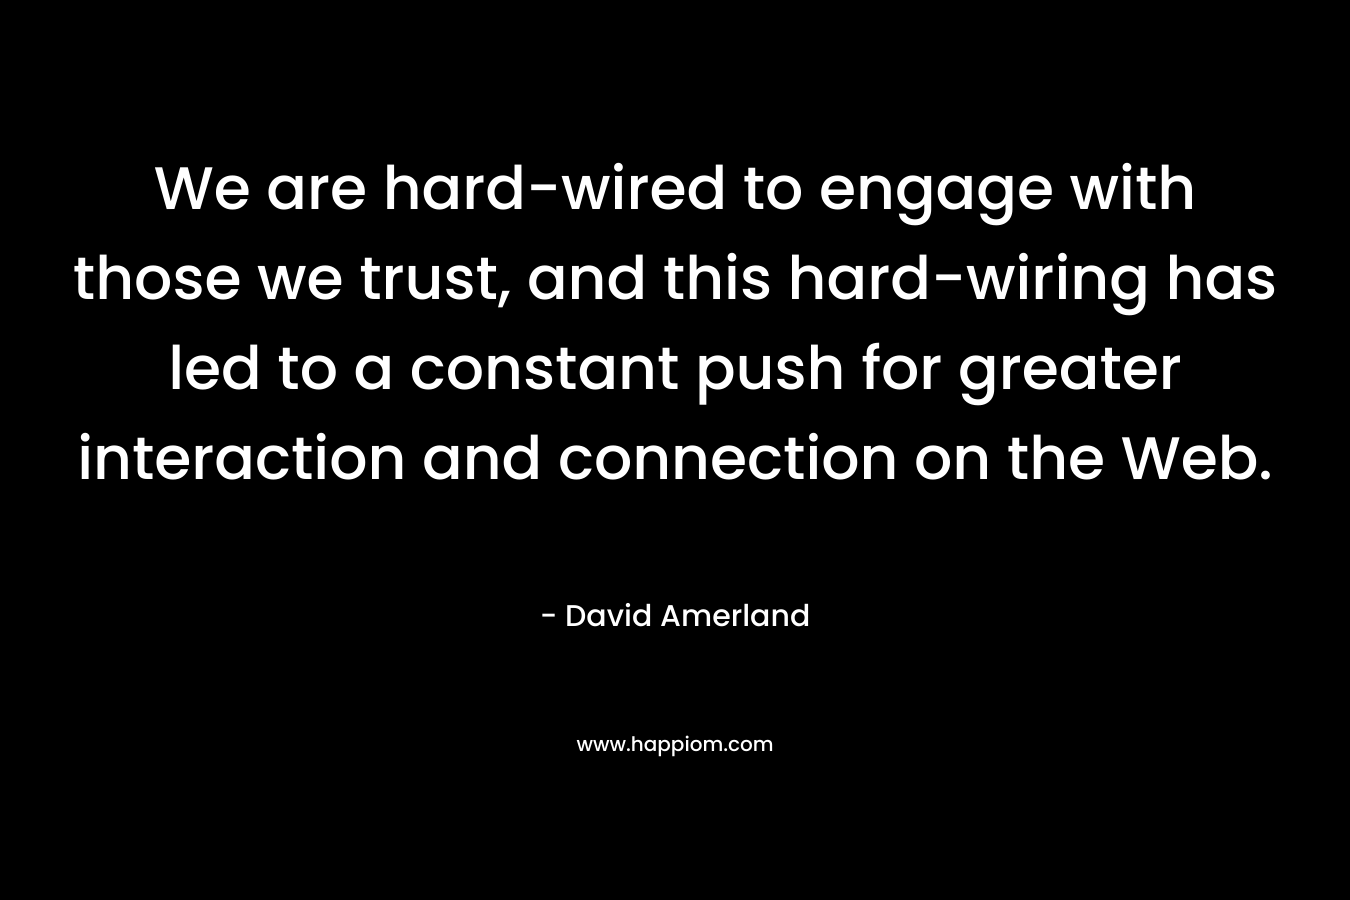 We are hard-wired to engage with those we trust, and this hard-wiring has led to a constant push for greater interaction and connection on the Web. – David Amerland